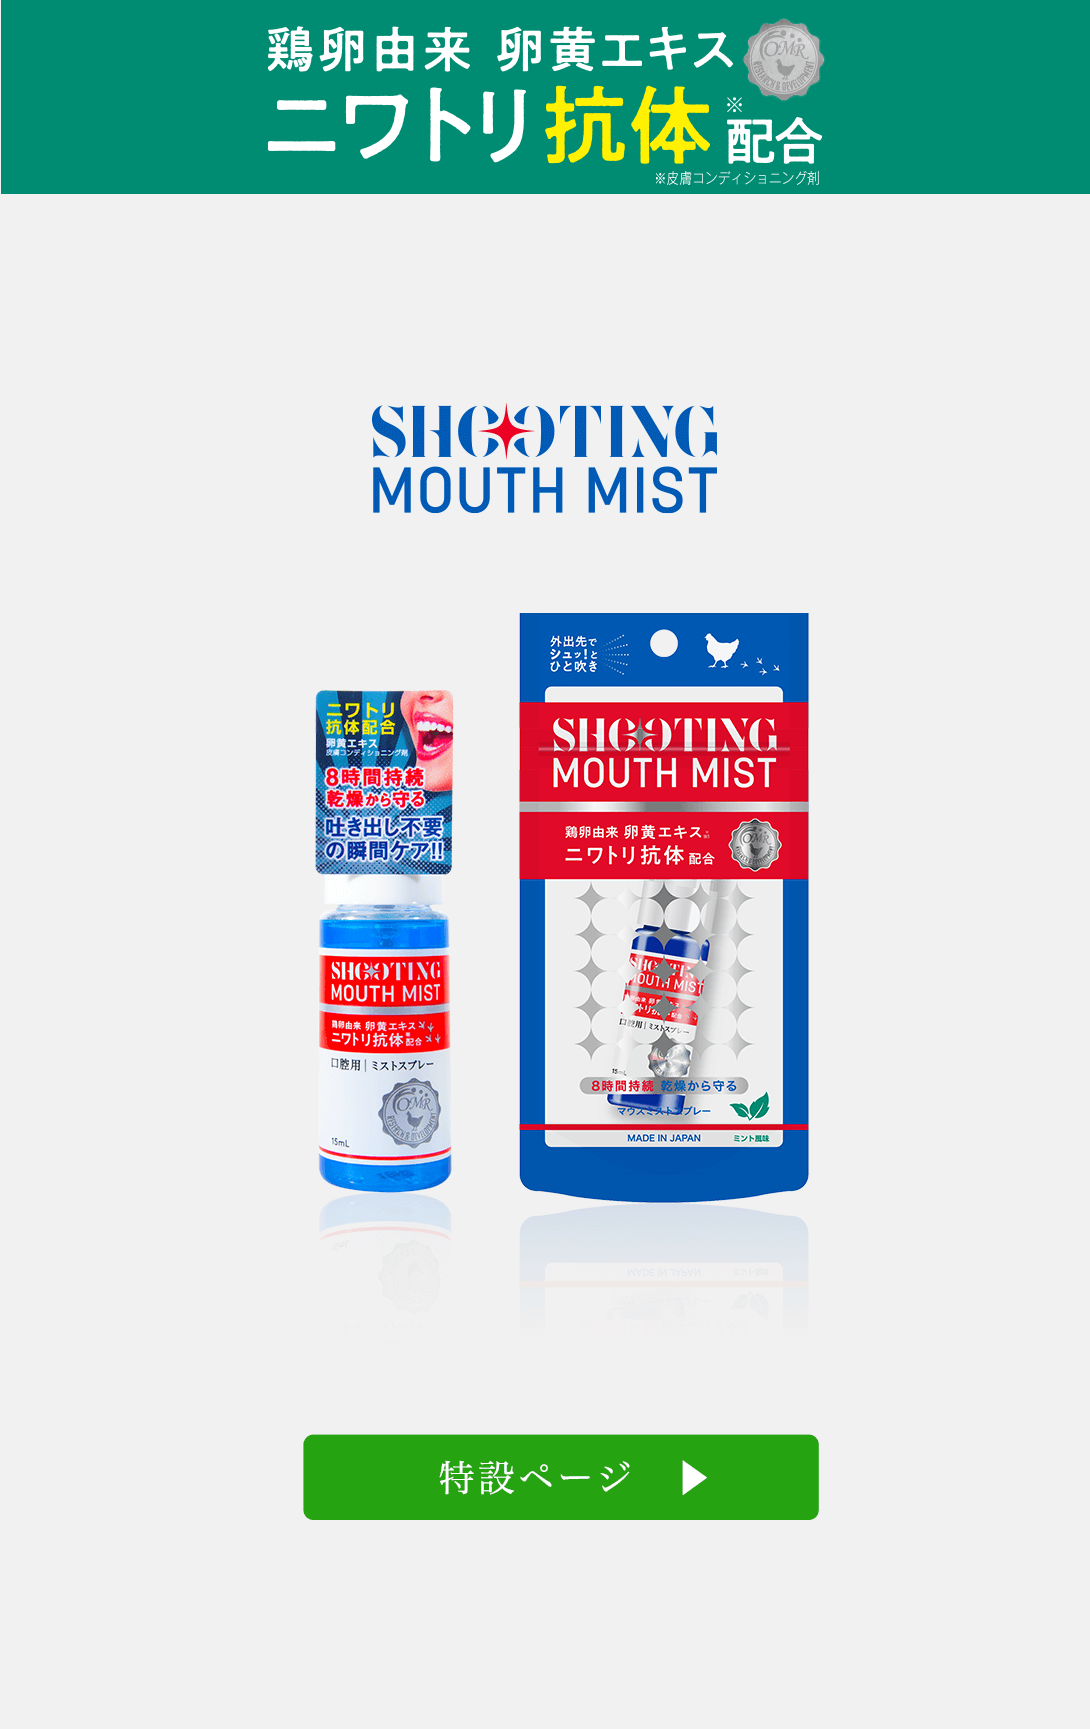 SHOOTING MOUTH MIST